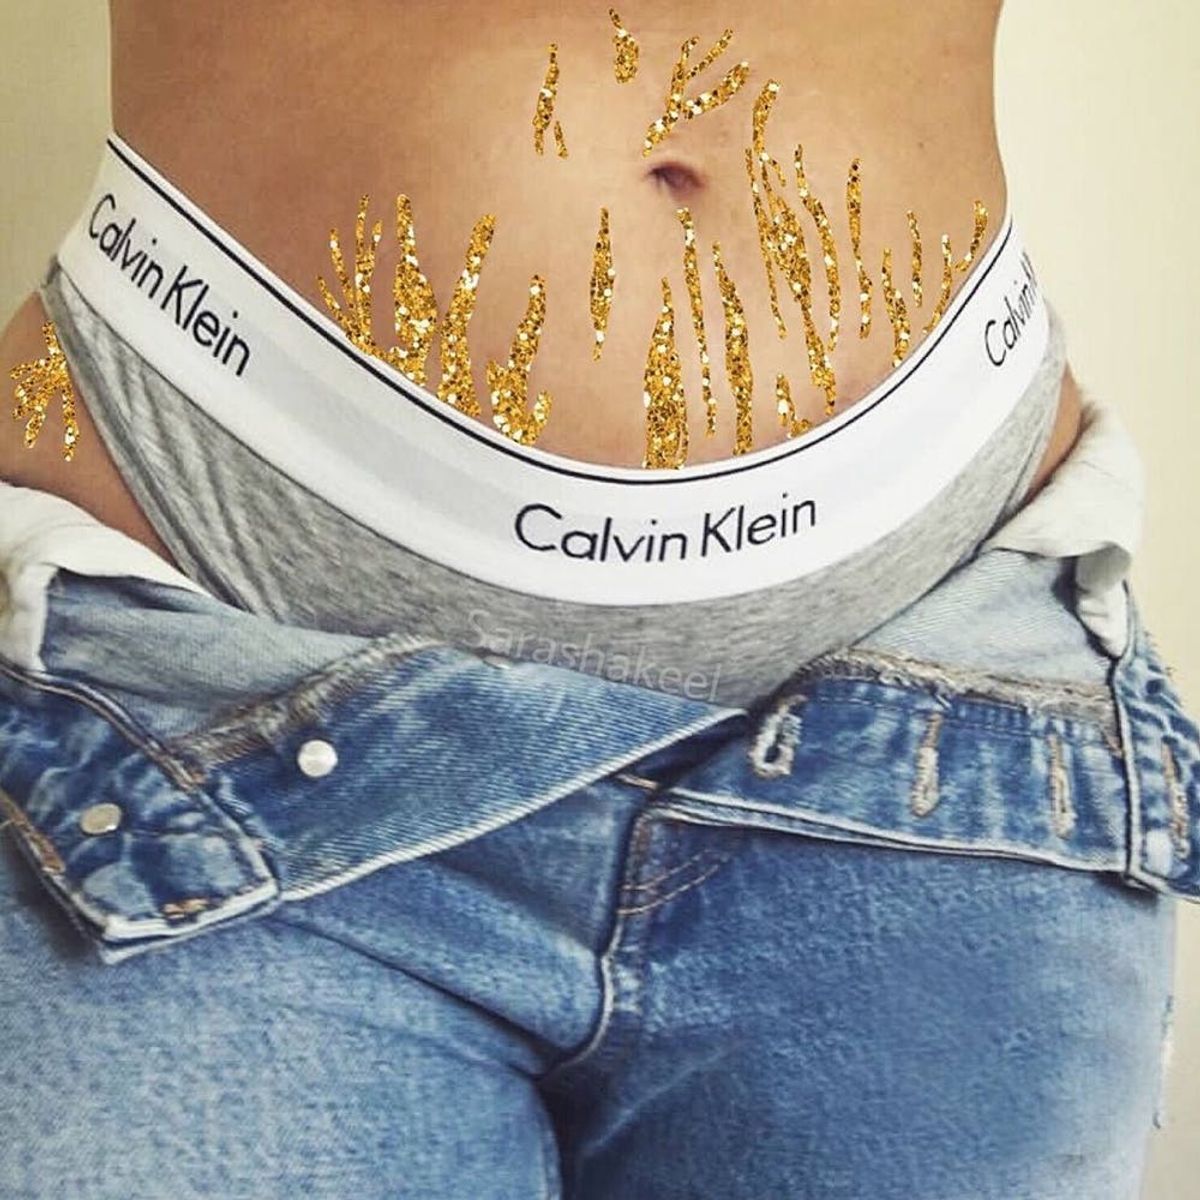 This Artist Celebrates Stretch Marks With Glitter and Imagination